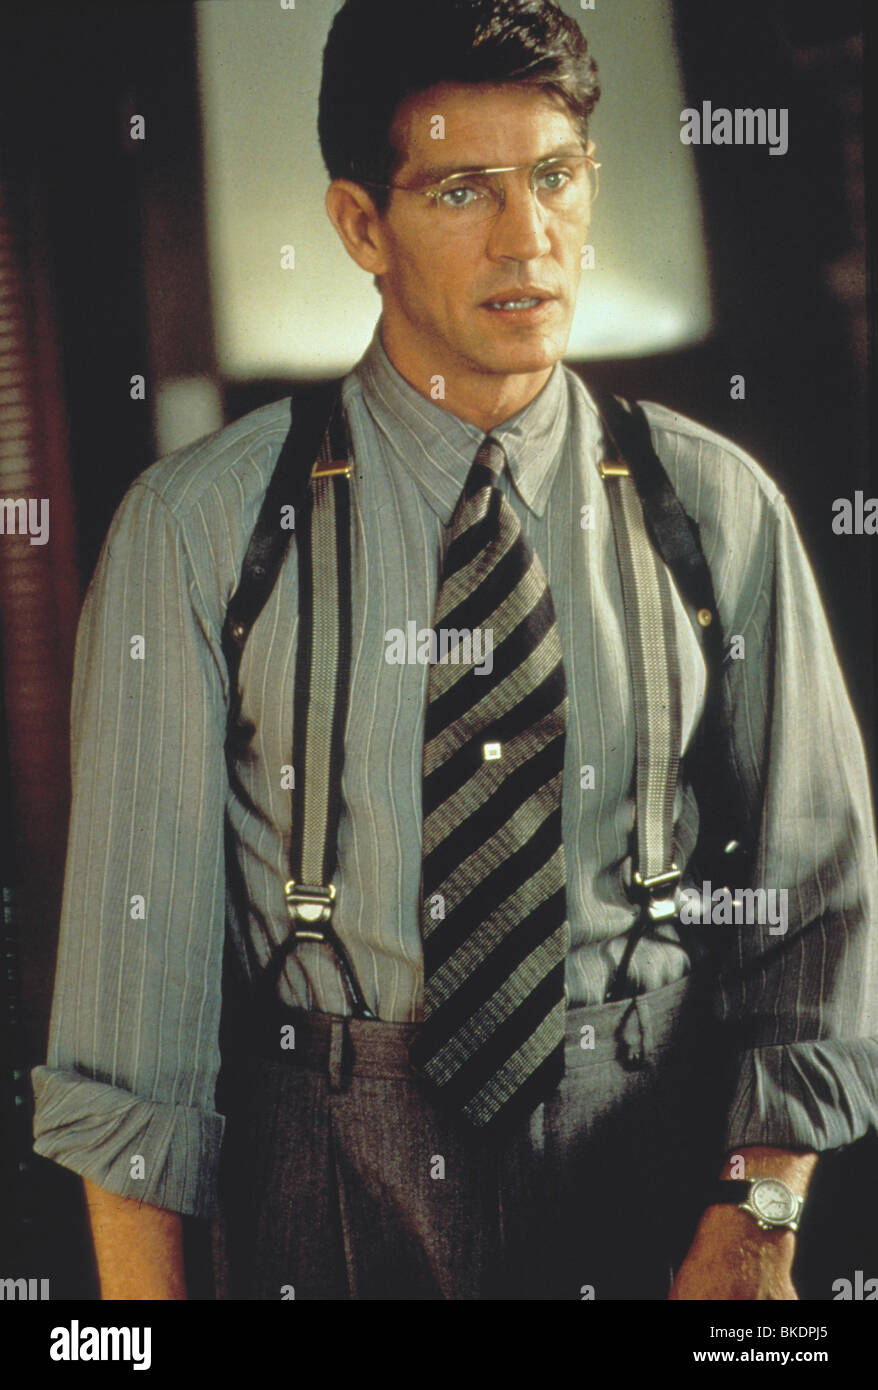 MOST WANTED -1997 ERIC ROBERTS Stock Photo